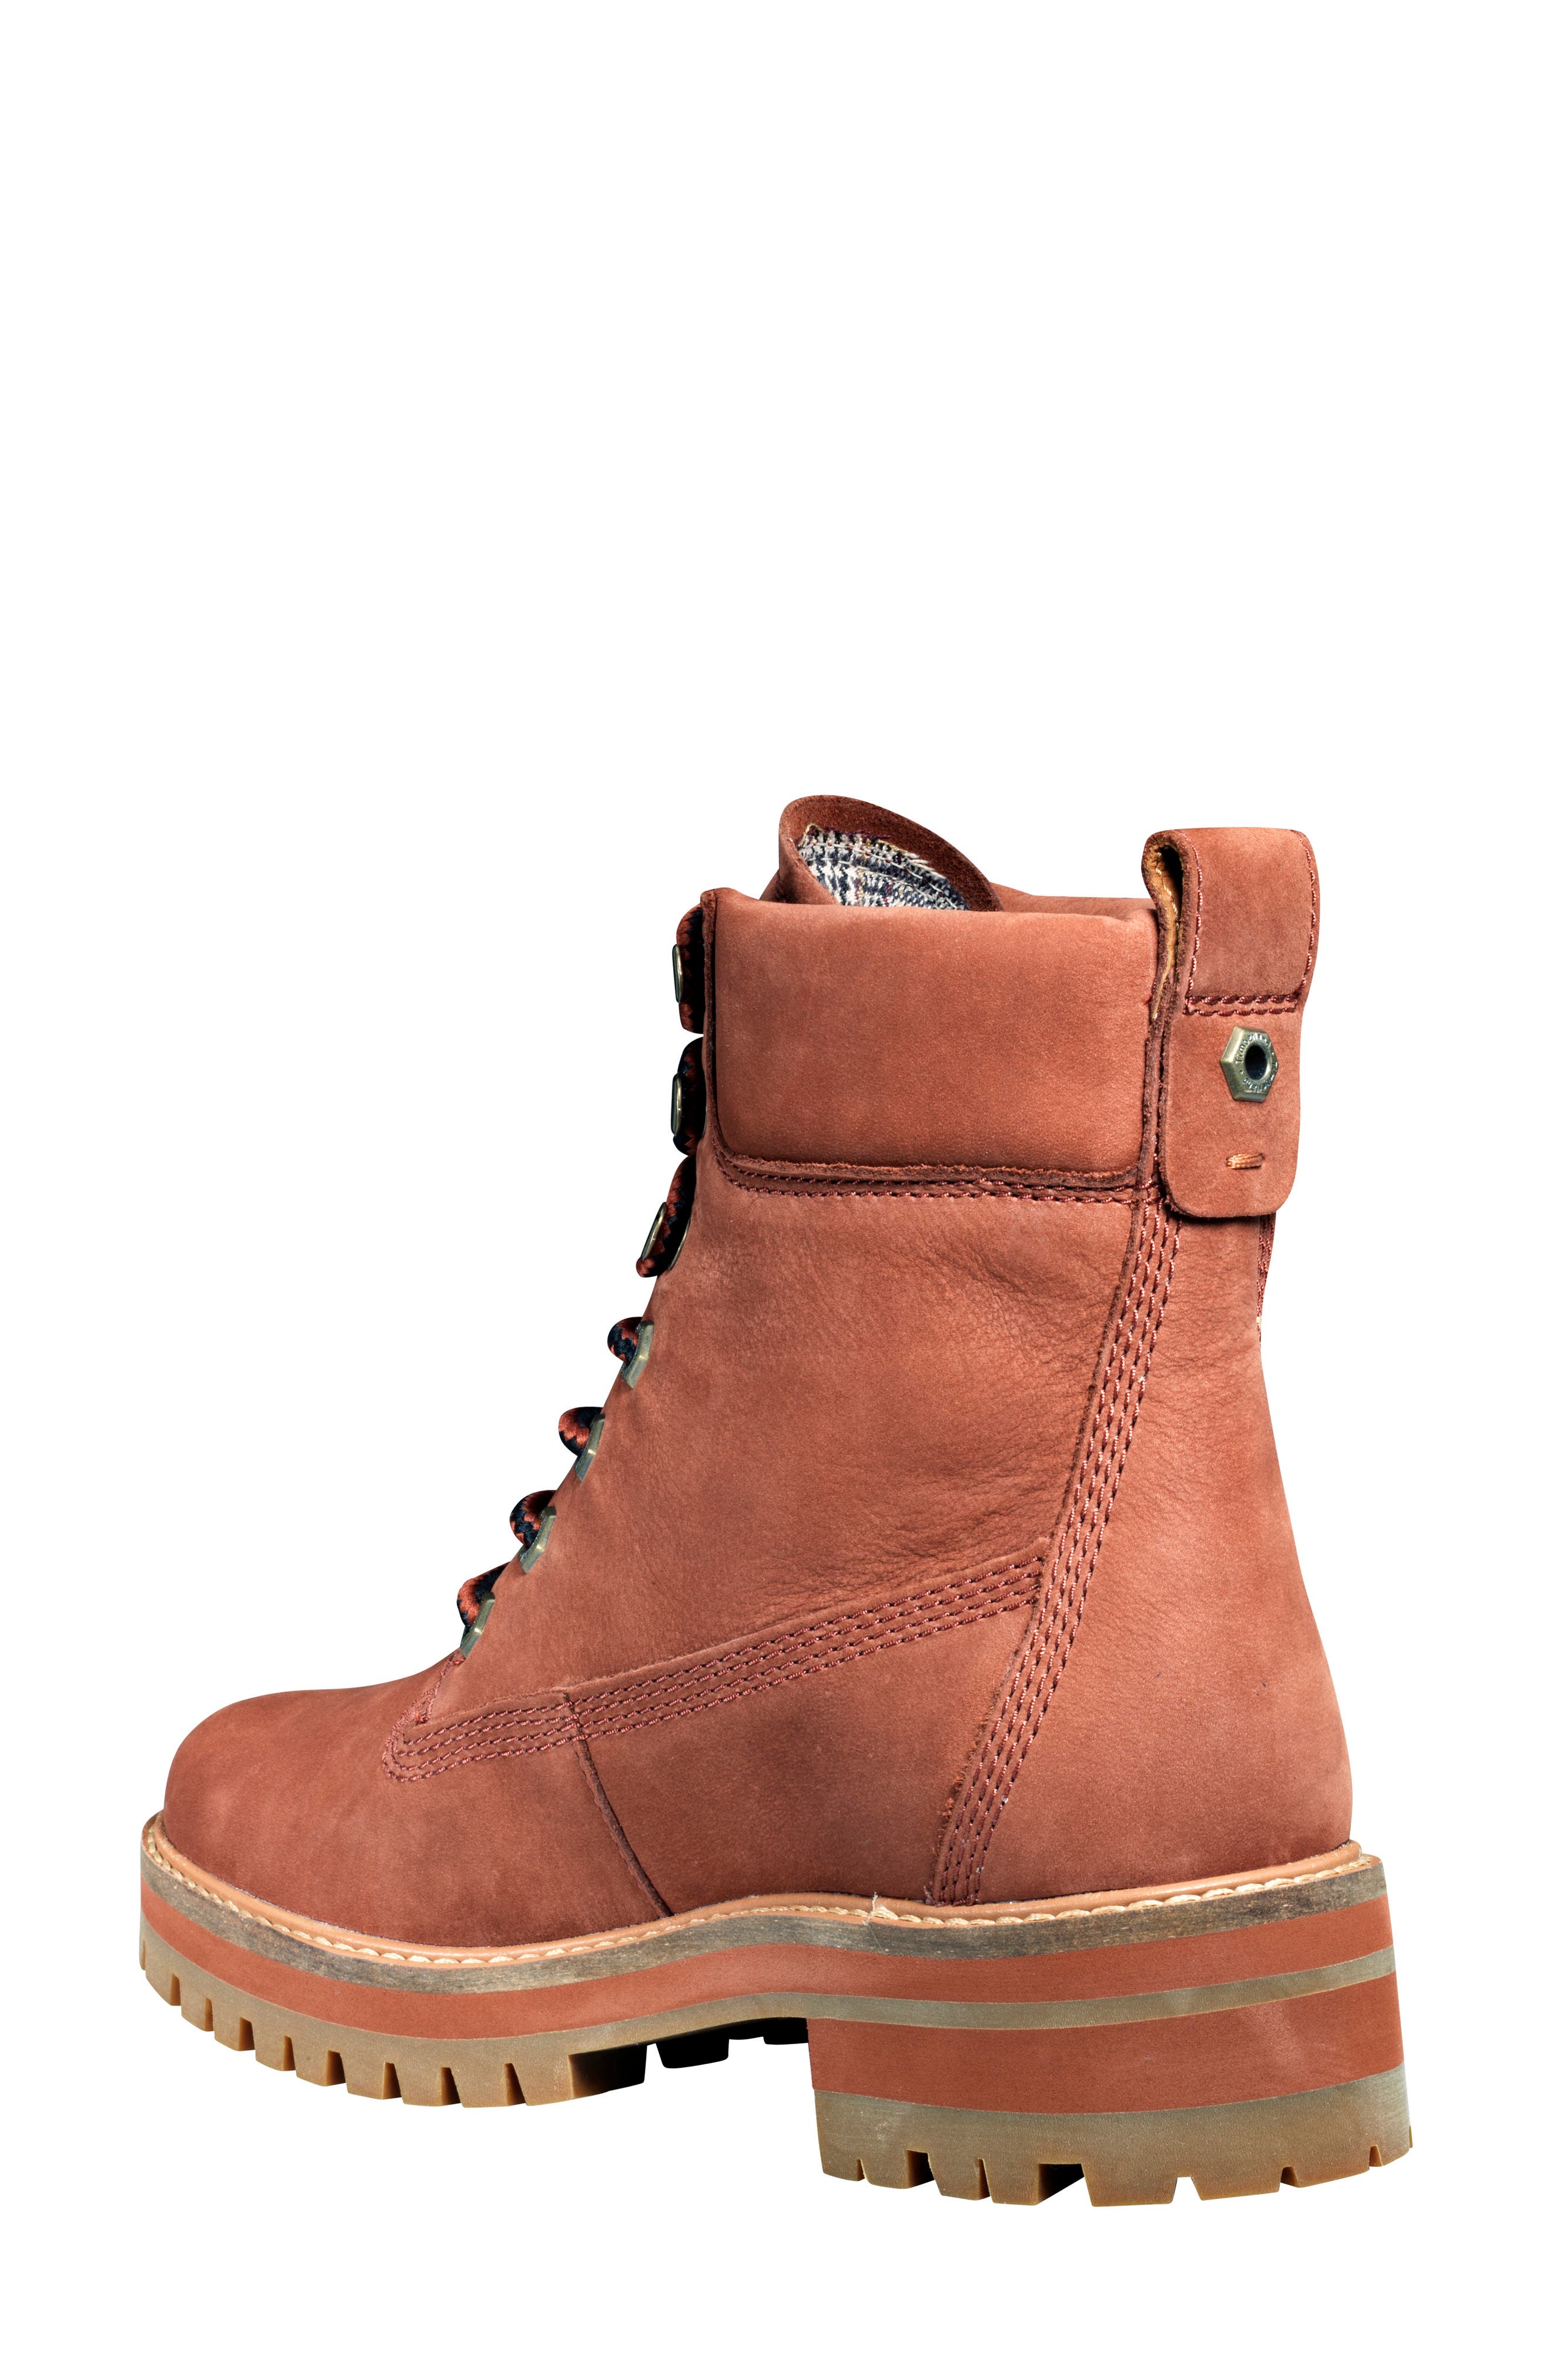 timberland water resistant